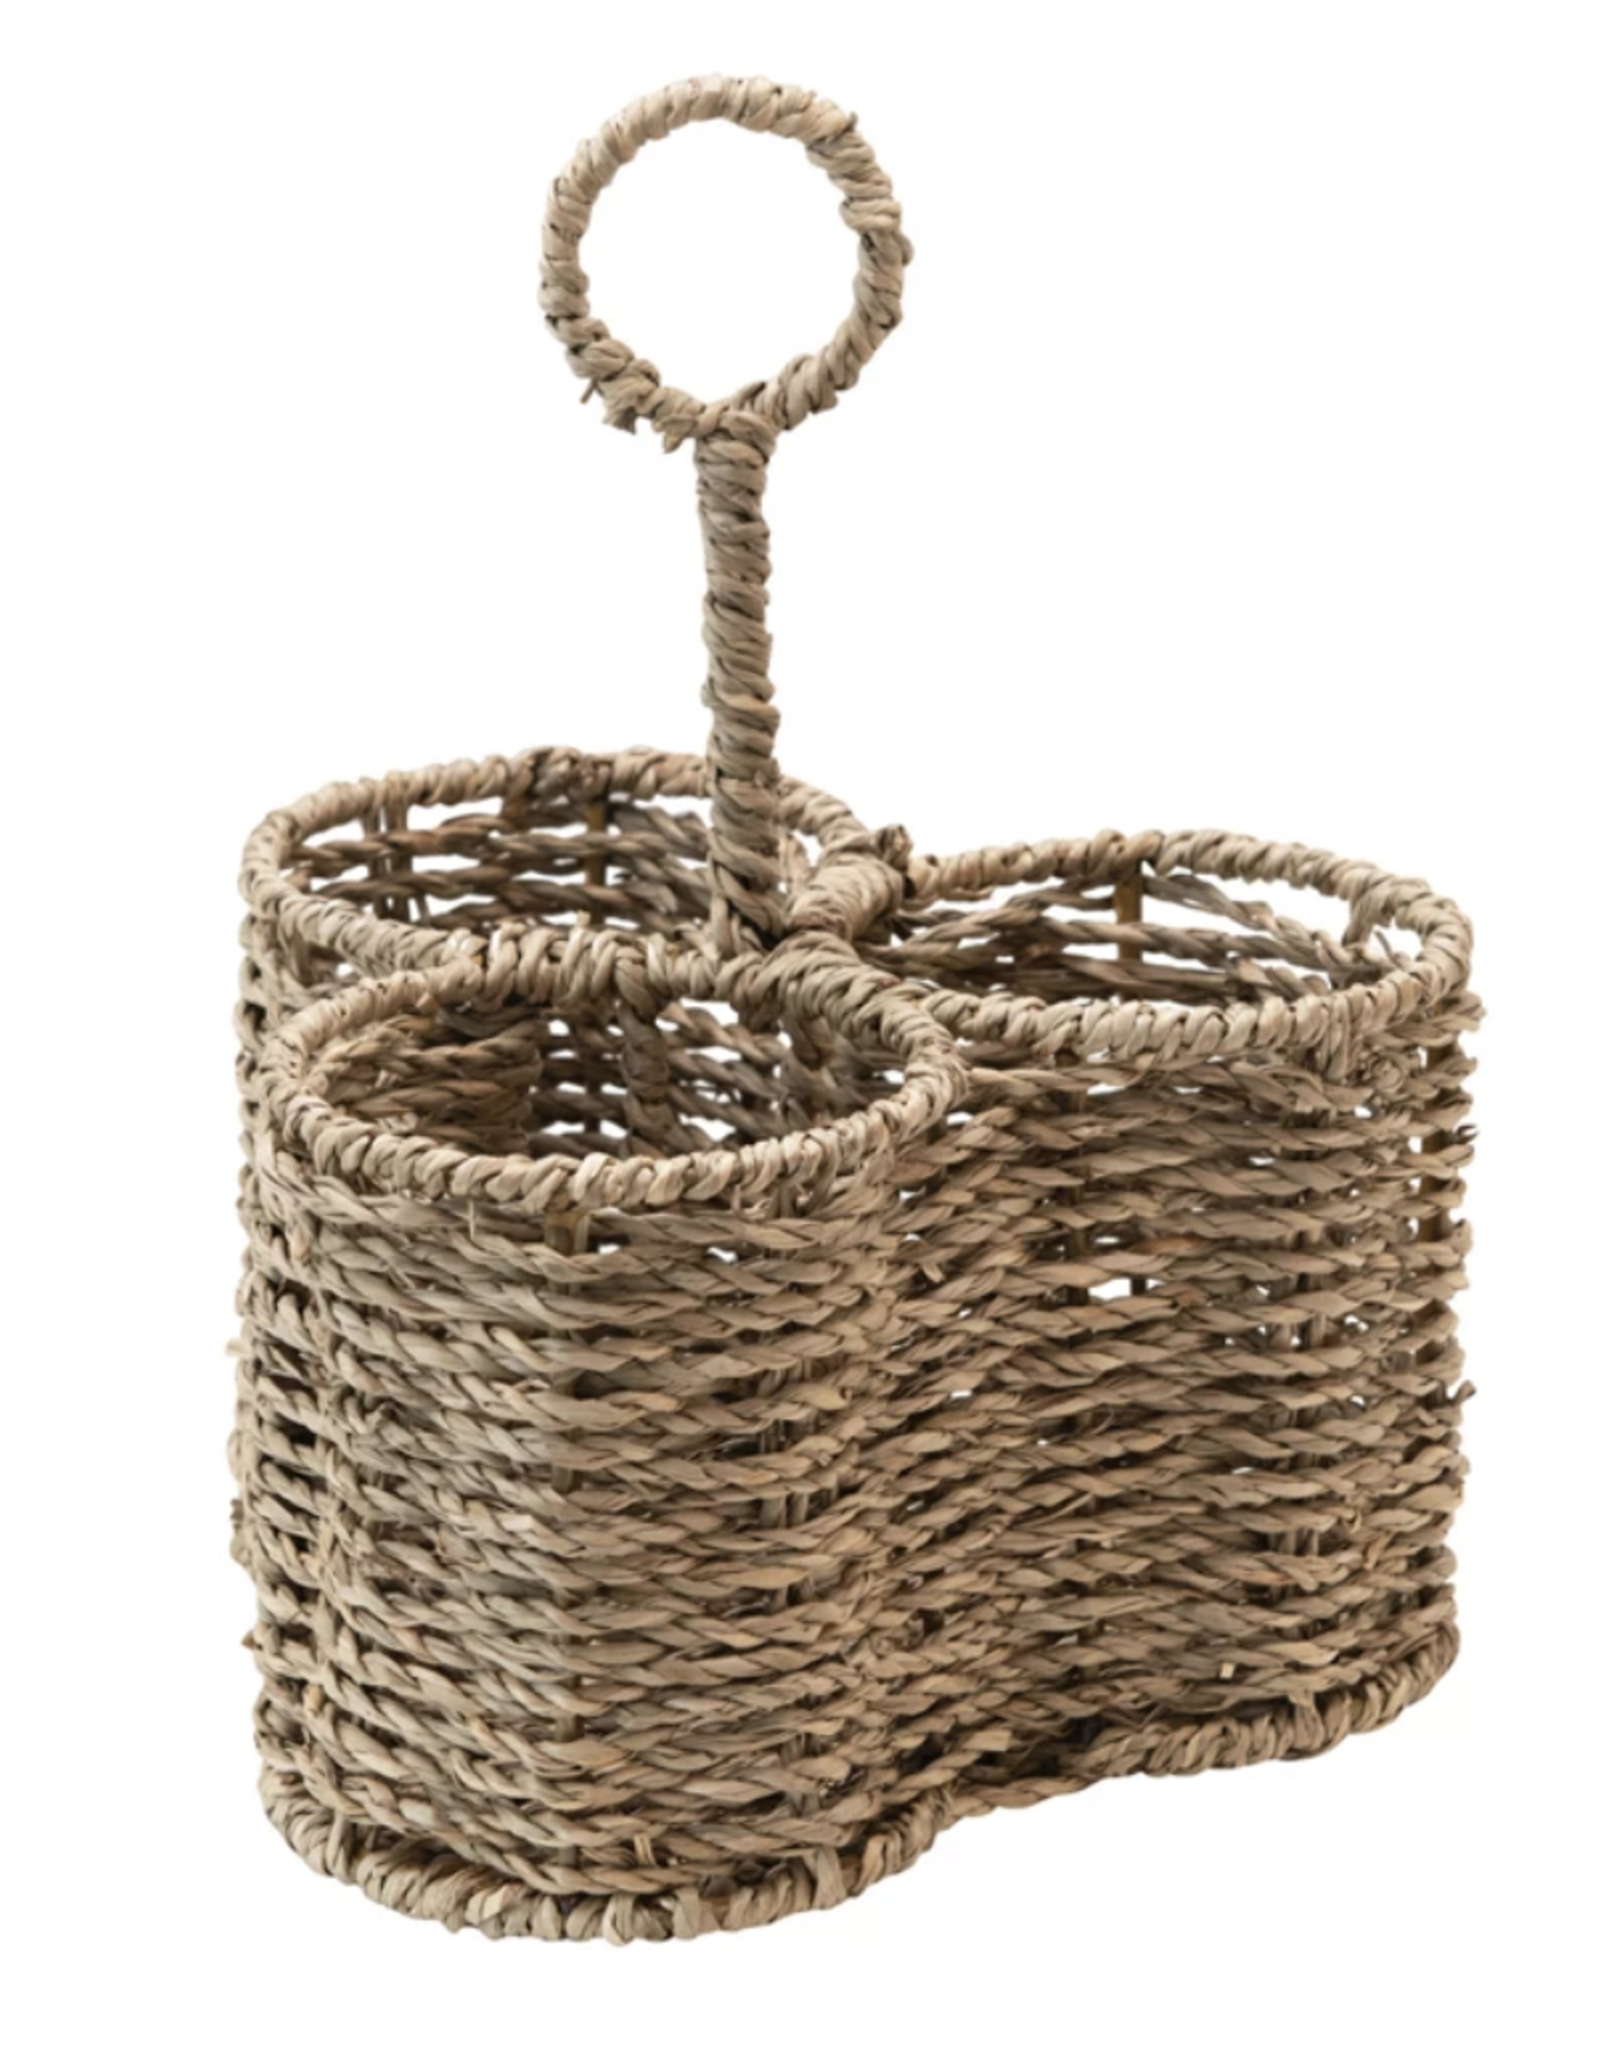 Woven Seagrass Caddy with 3 Sections